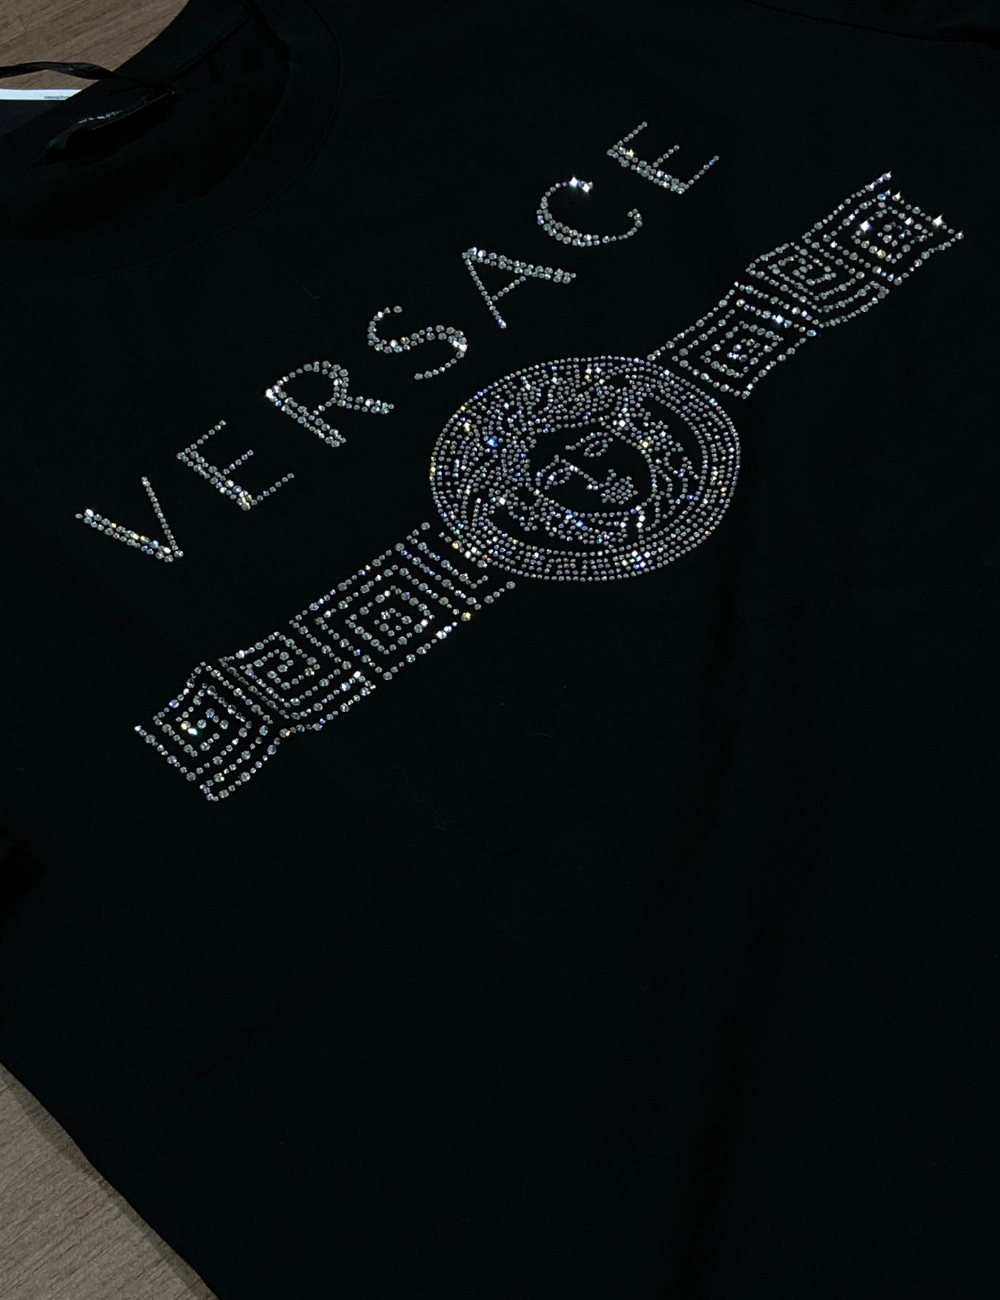 Versace Rhinestone Medusa Logo T-Shirt (Black) - Shop Streetwear, Sneakers, Slippers and Gifts online | Malaysia - The Factory KL